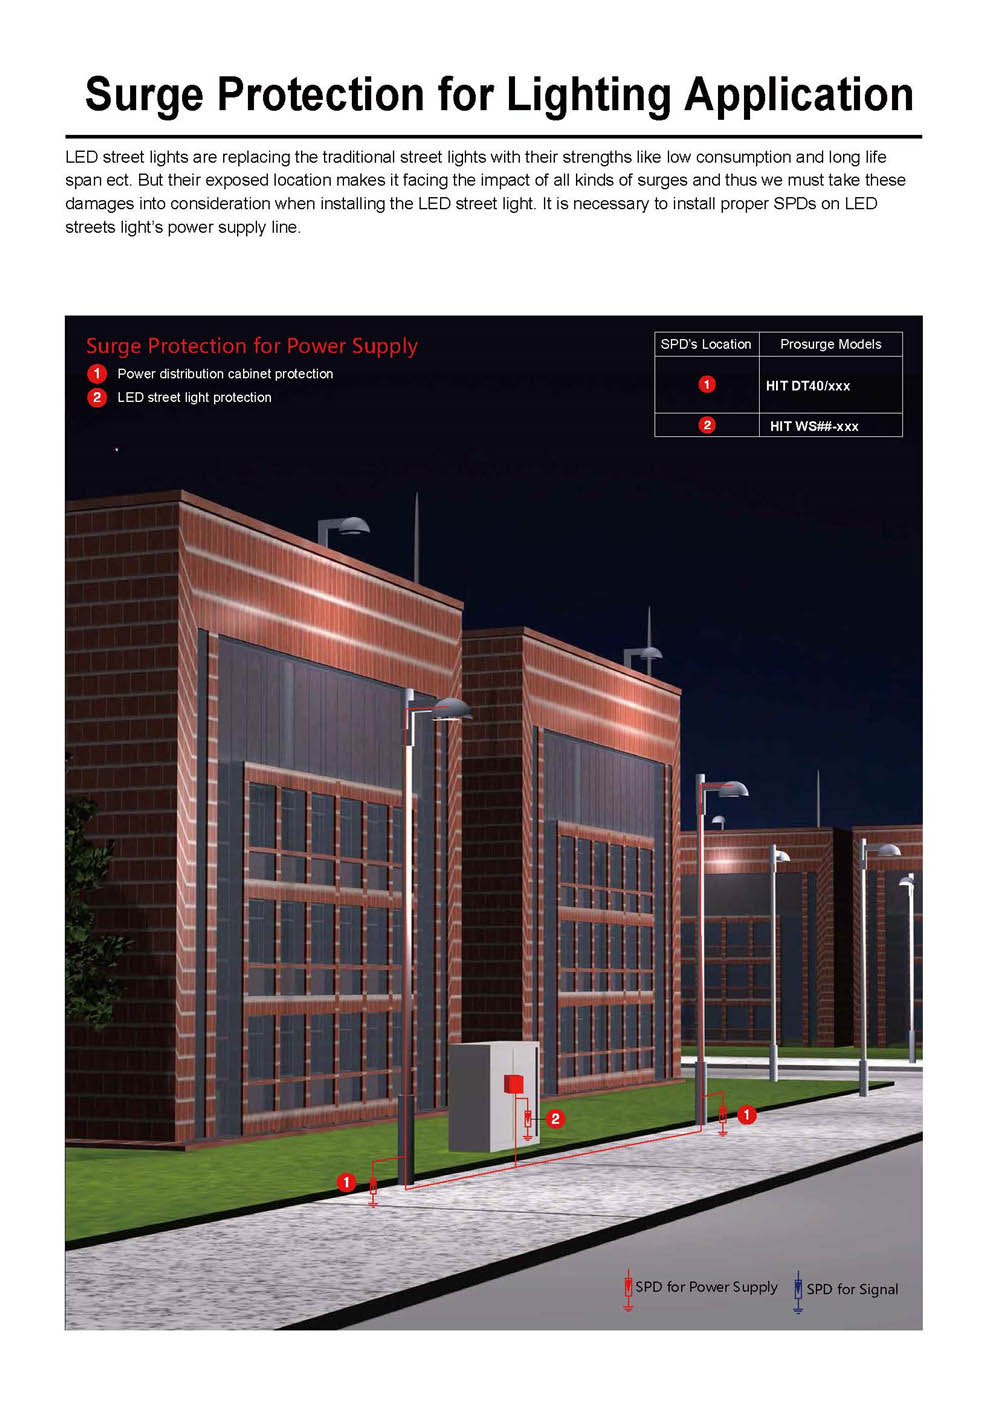 Surge Protection Solution for LED Street Lighting - Prosurge-single page.jpg